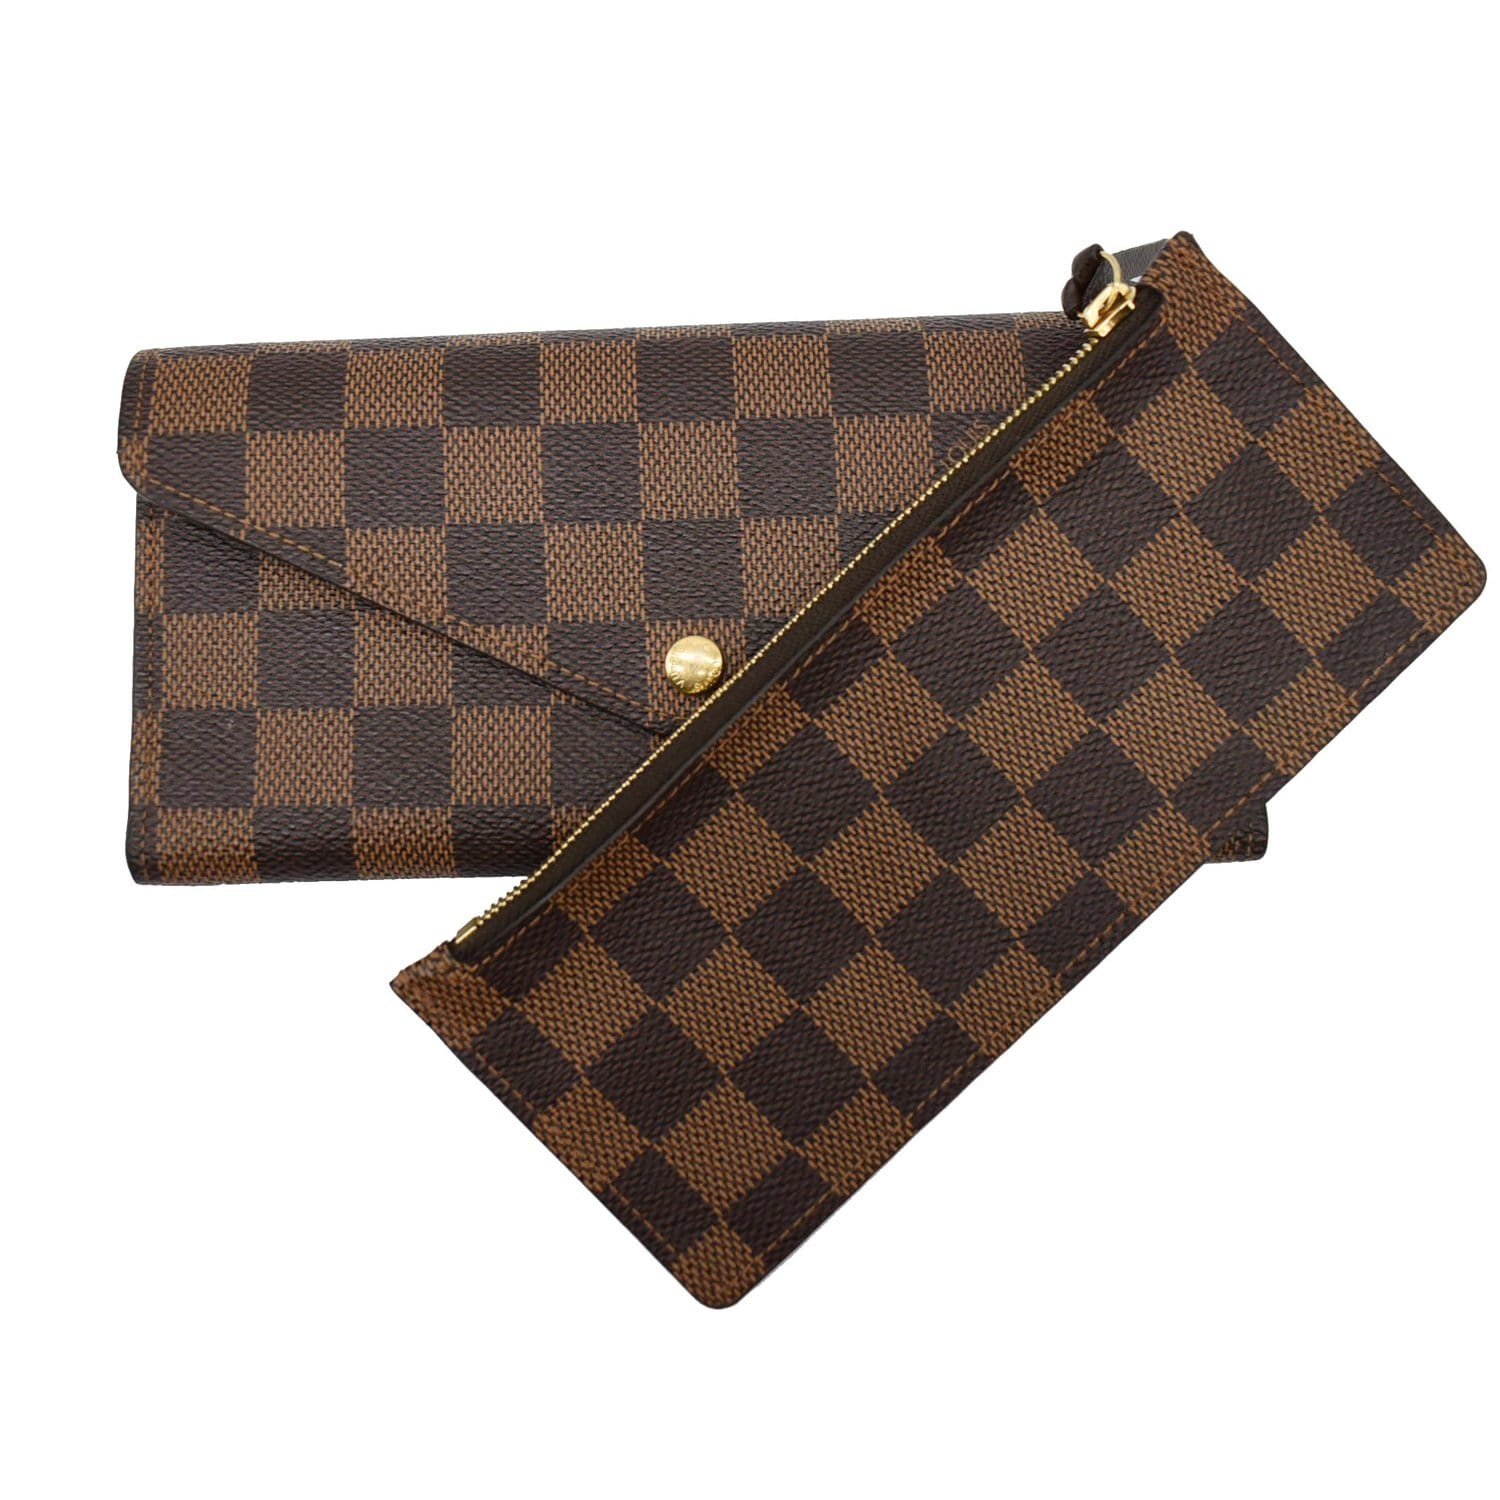 Louis Vuitton - Authenticated Joséphine Wallet - Cloth Brown for Women, Very Good Condition